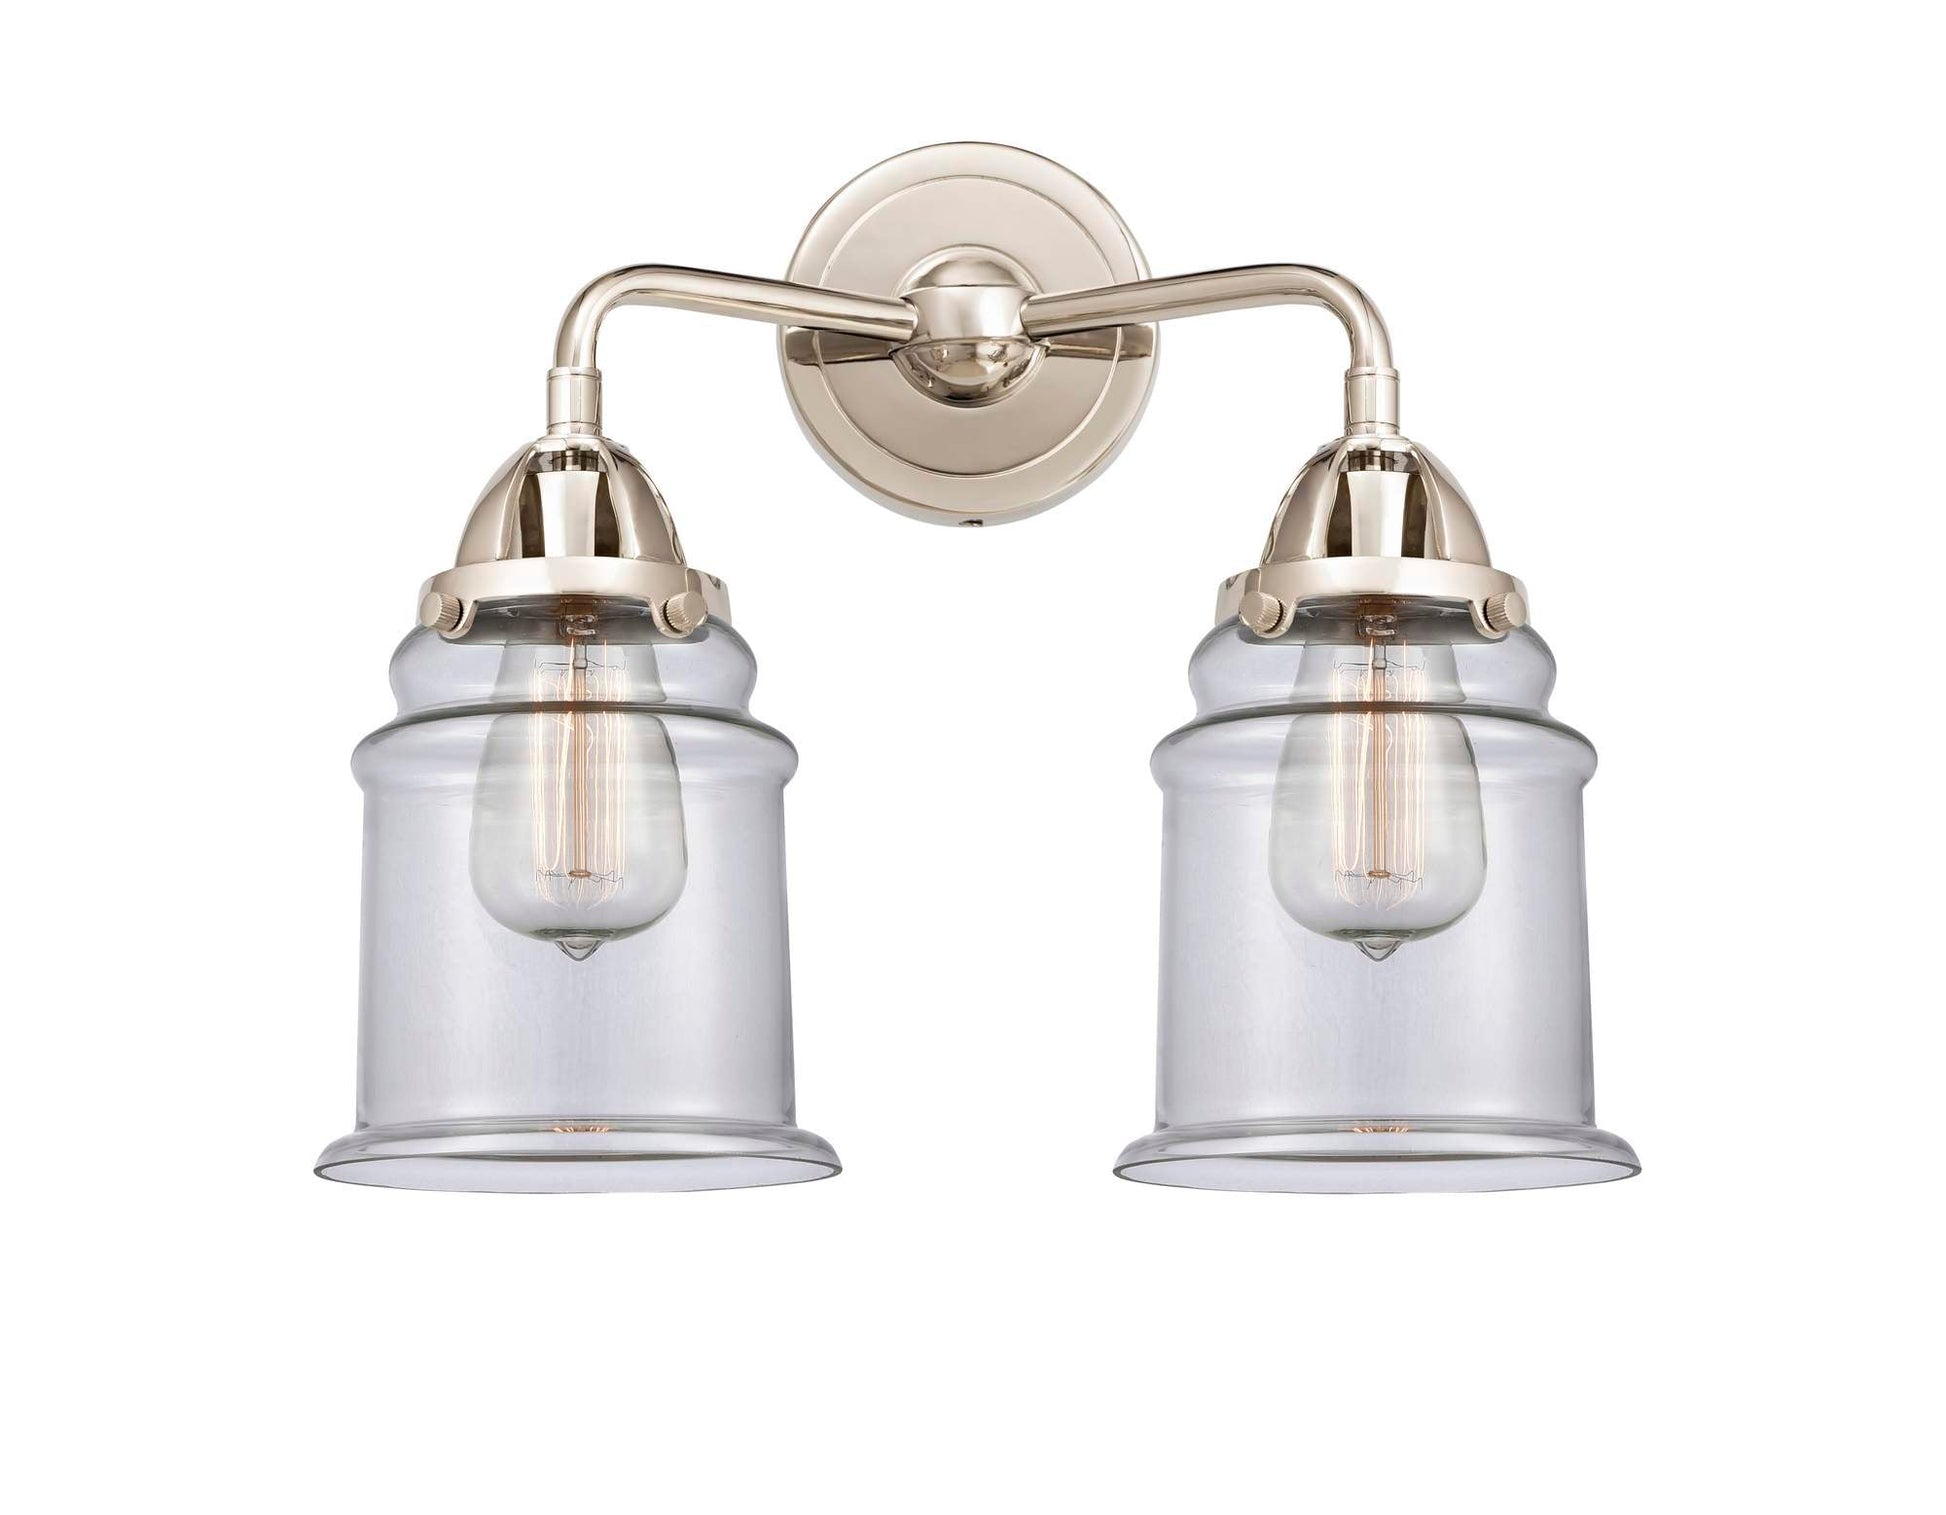 288-2W-PN-G182 2-Light 14" Polished Nickel Bath Vanity Light - Clear Canton Glass - LED Bulb - Dimmensions: 14 x 7.25 x 13.625 - Glass Up or Down: Yes